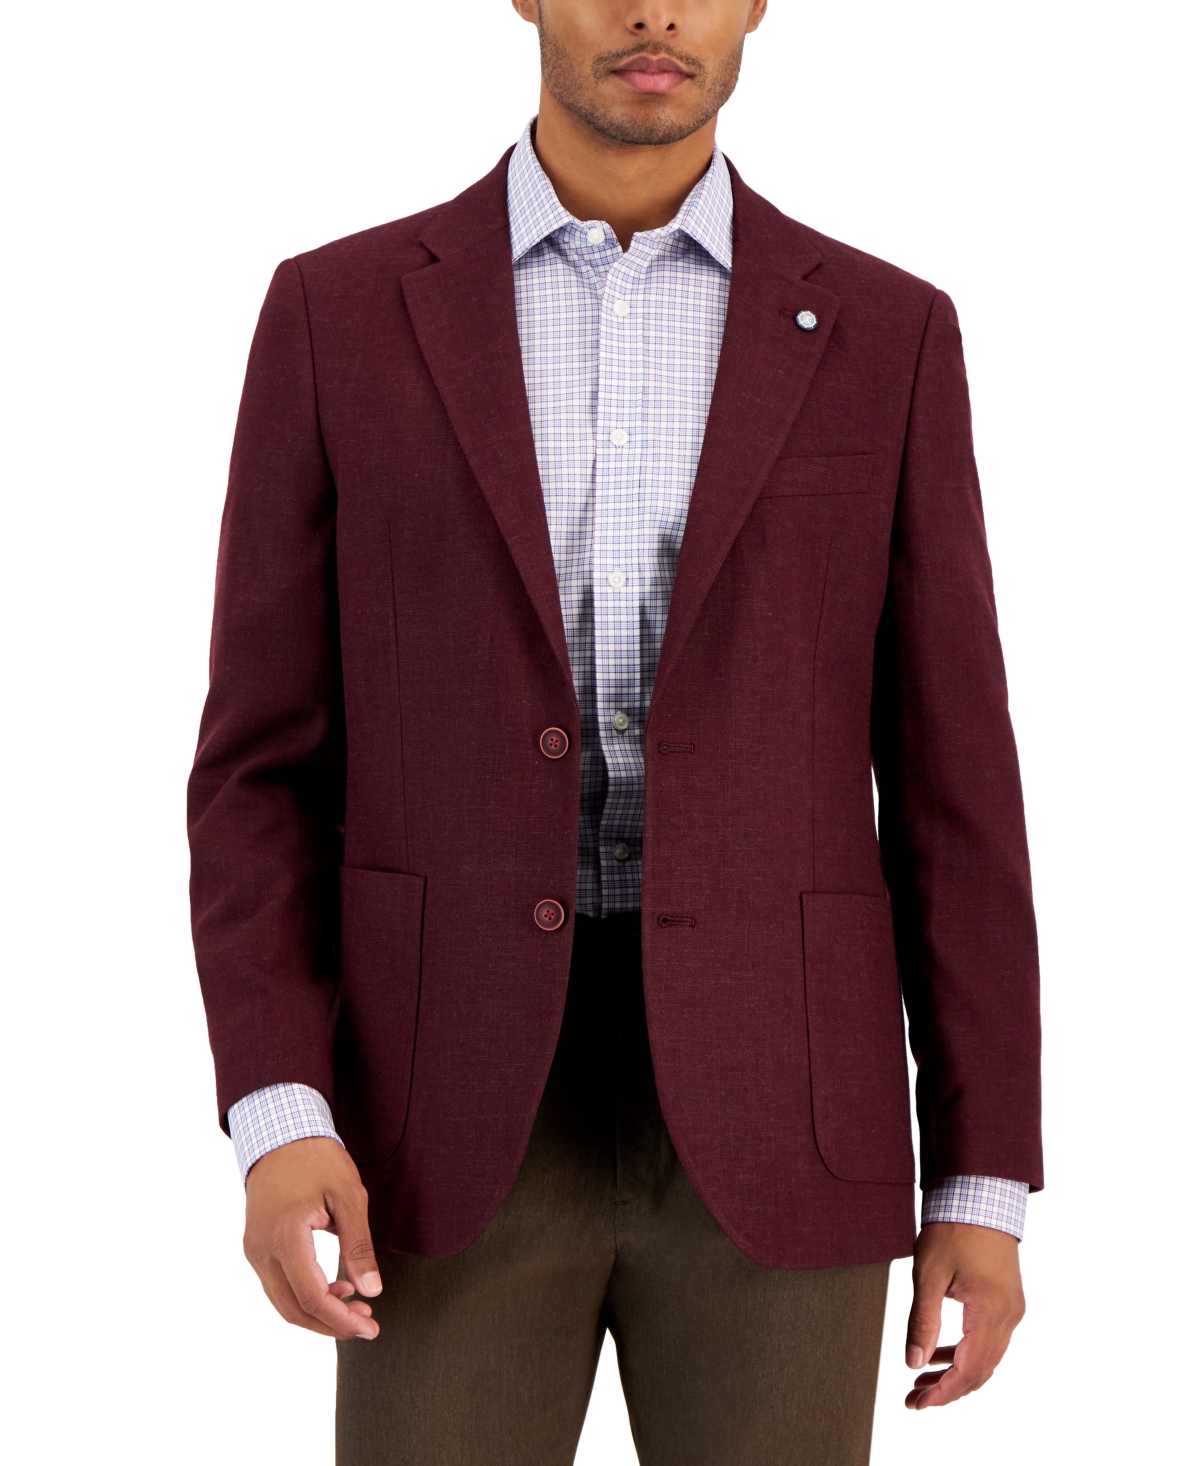 Men's Modern-Fit Active Stretch Woven Solid Sport Coat - Brown